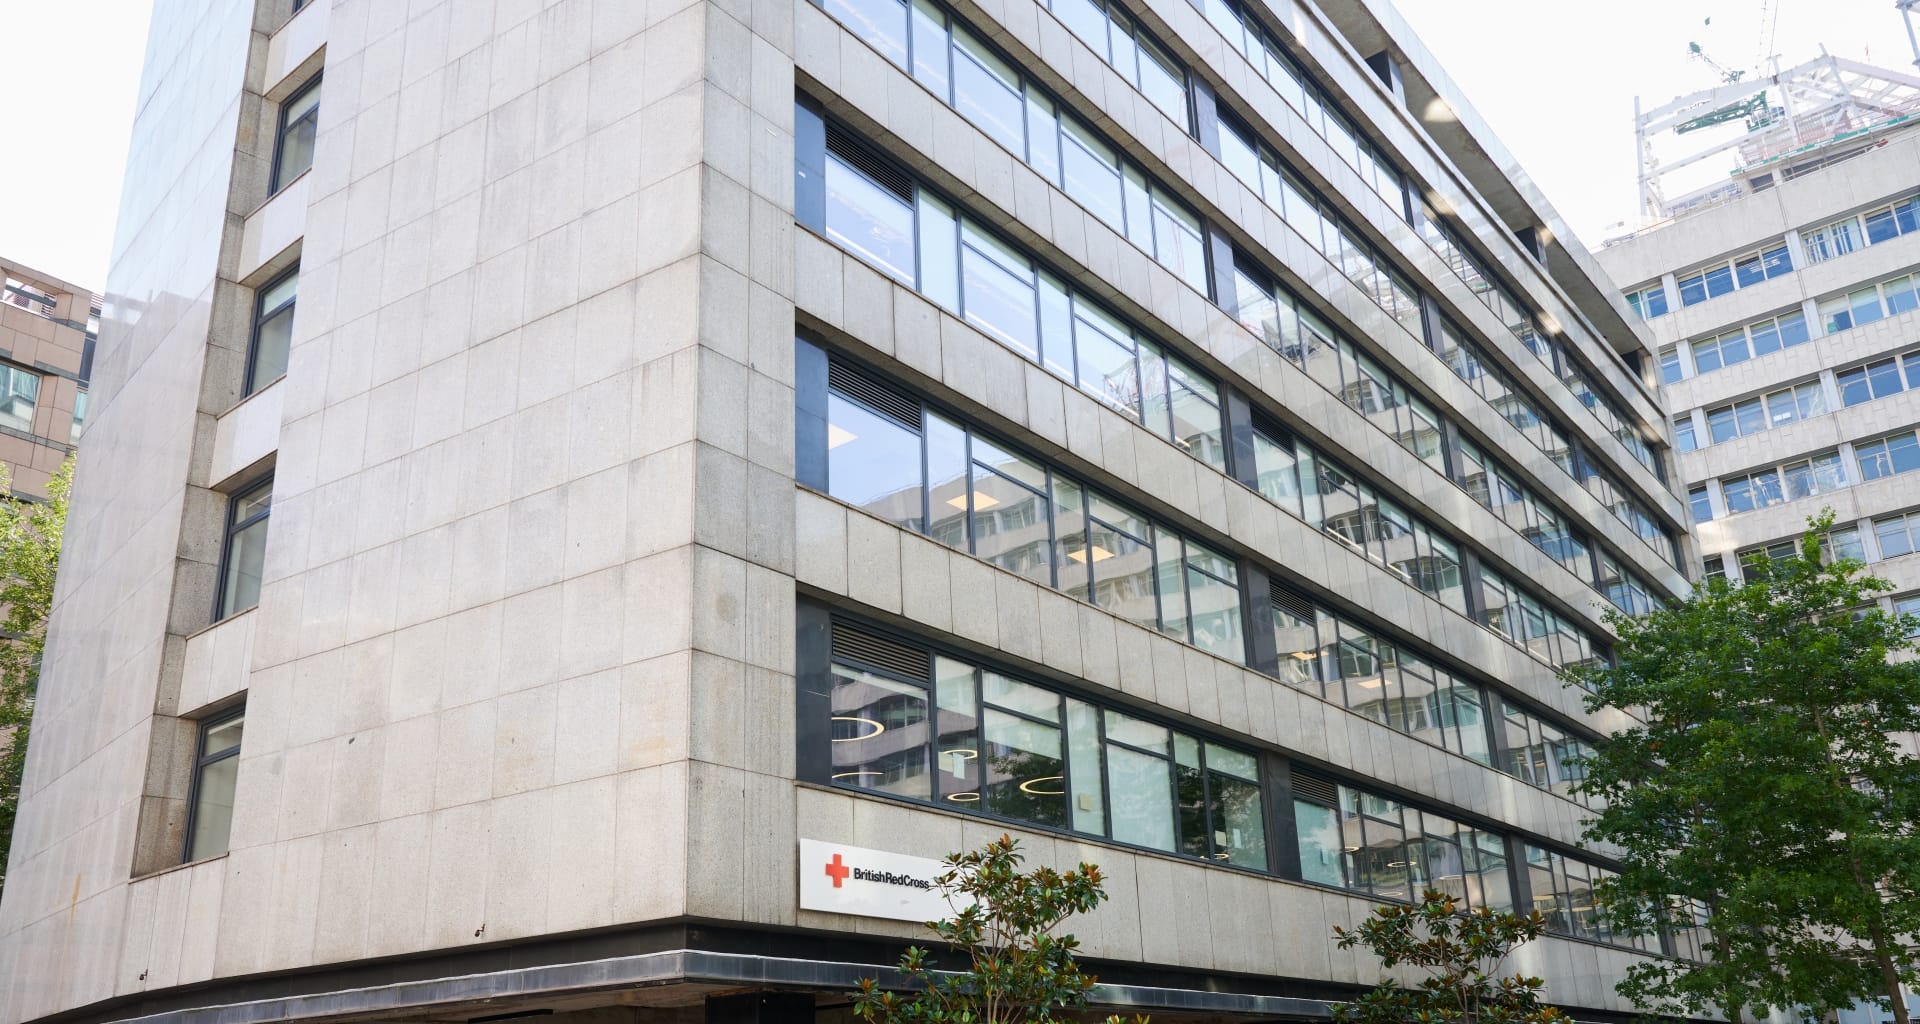 New Chapter for British Red Cross Building